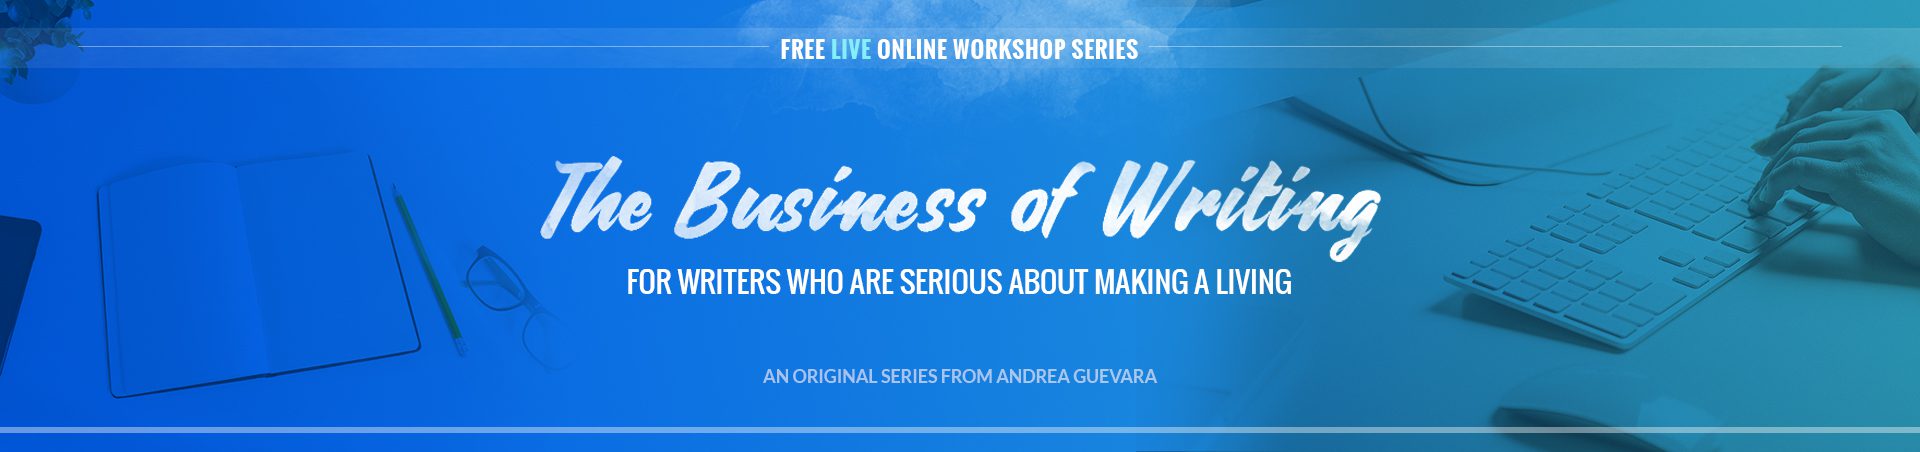 the business side of writing workshop series